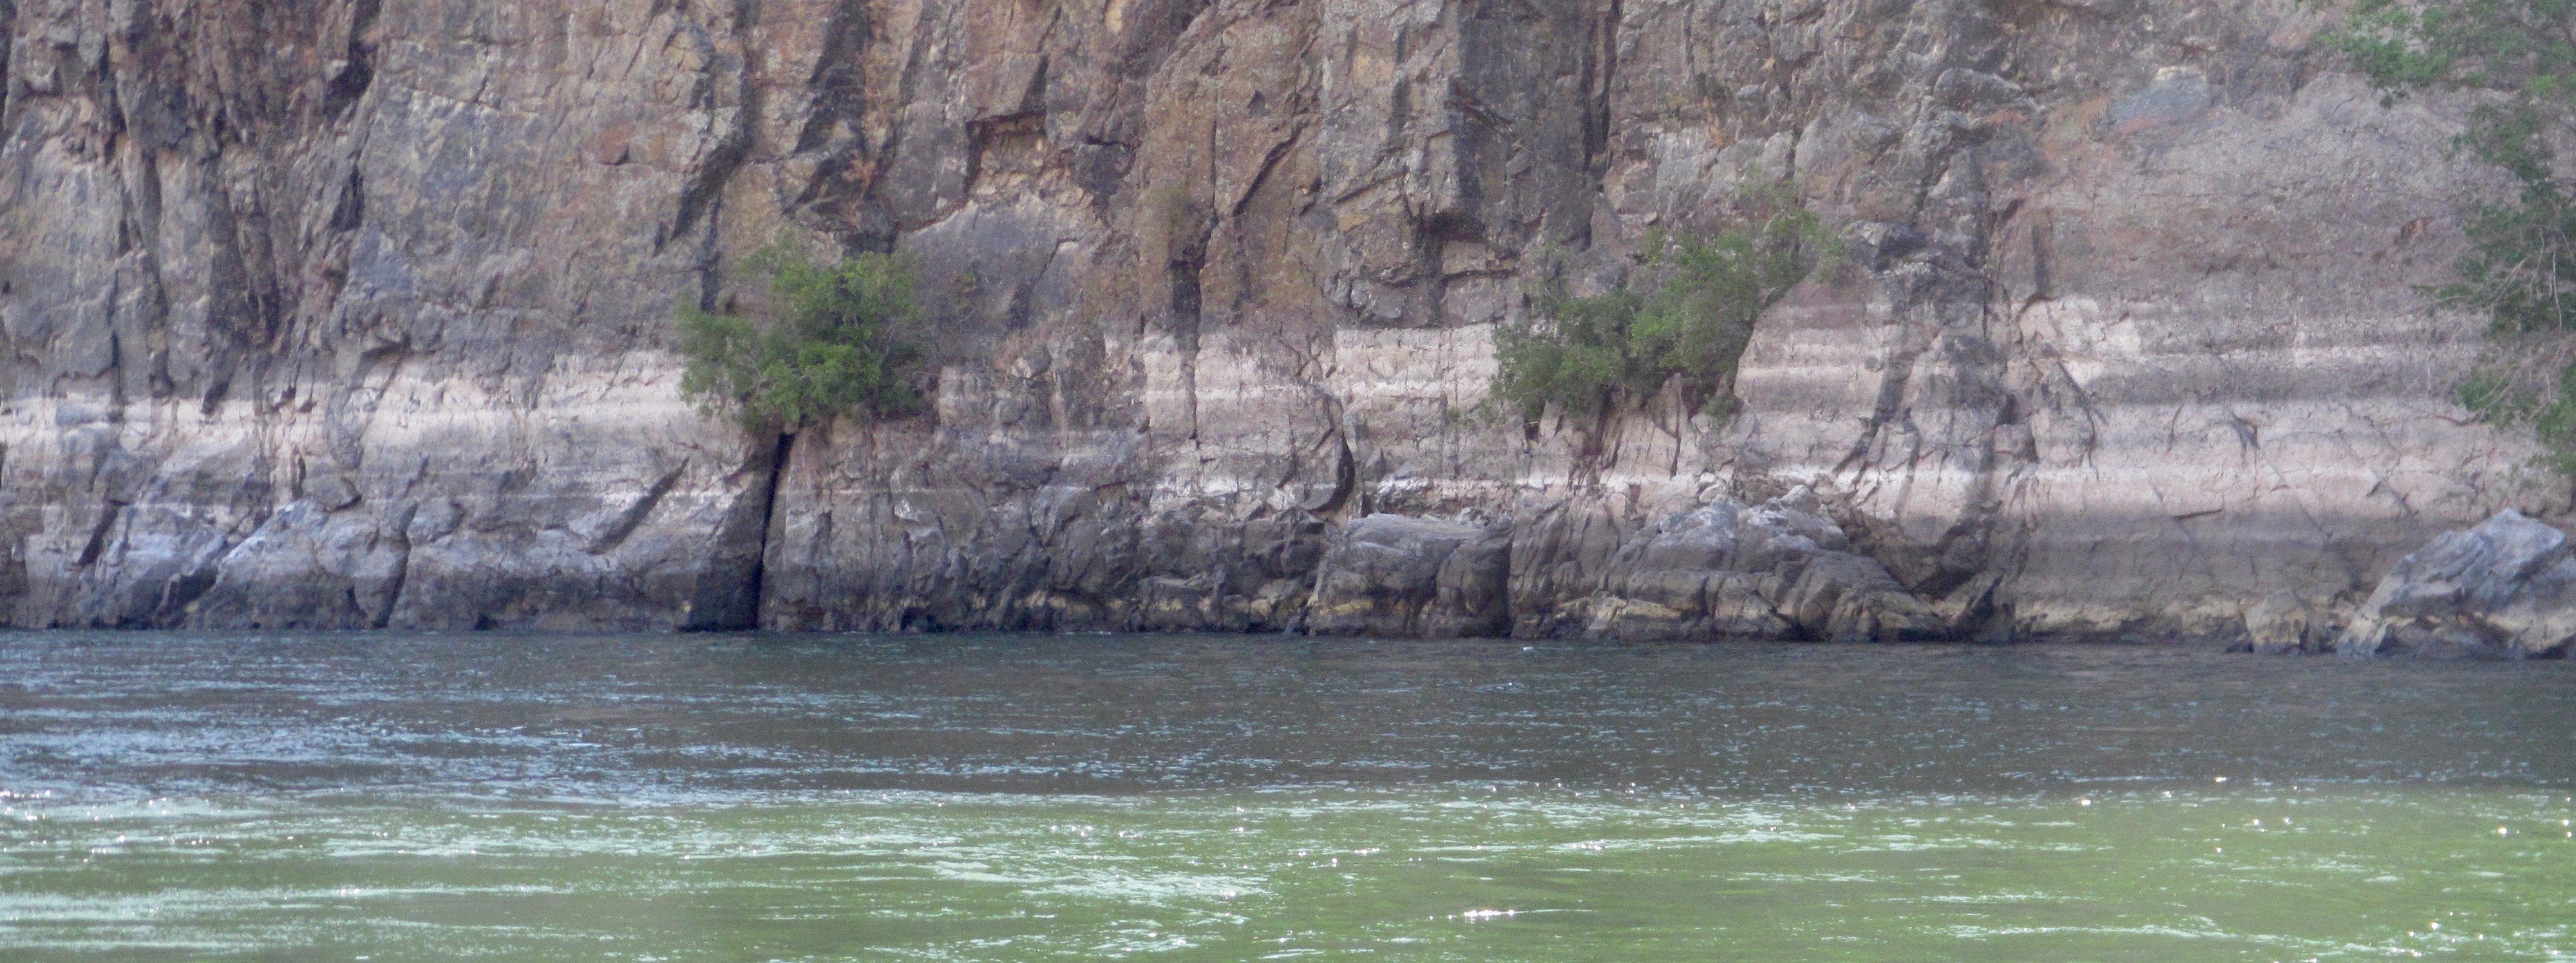  High Water Marks on the Snake River